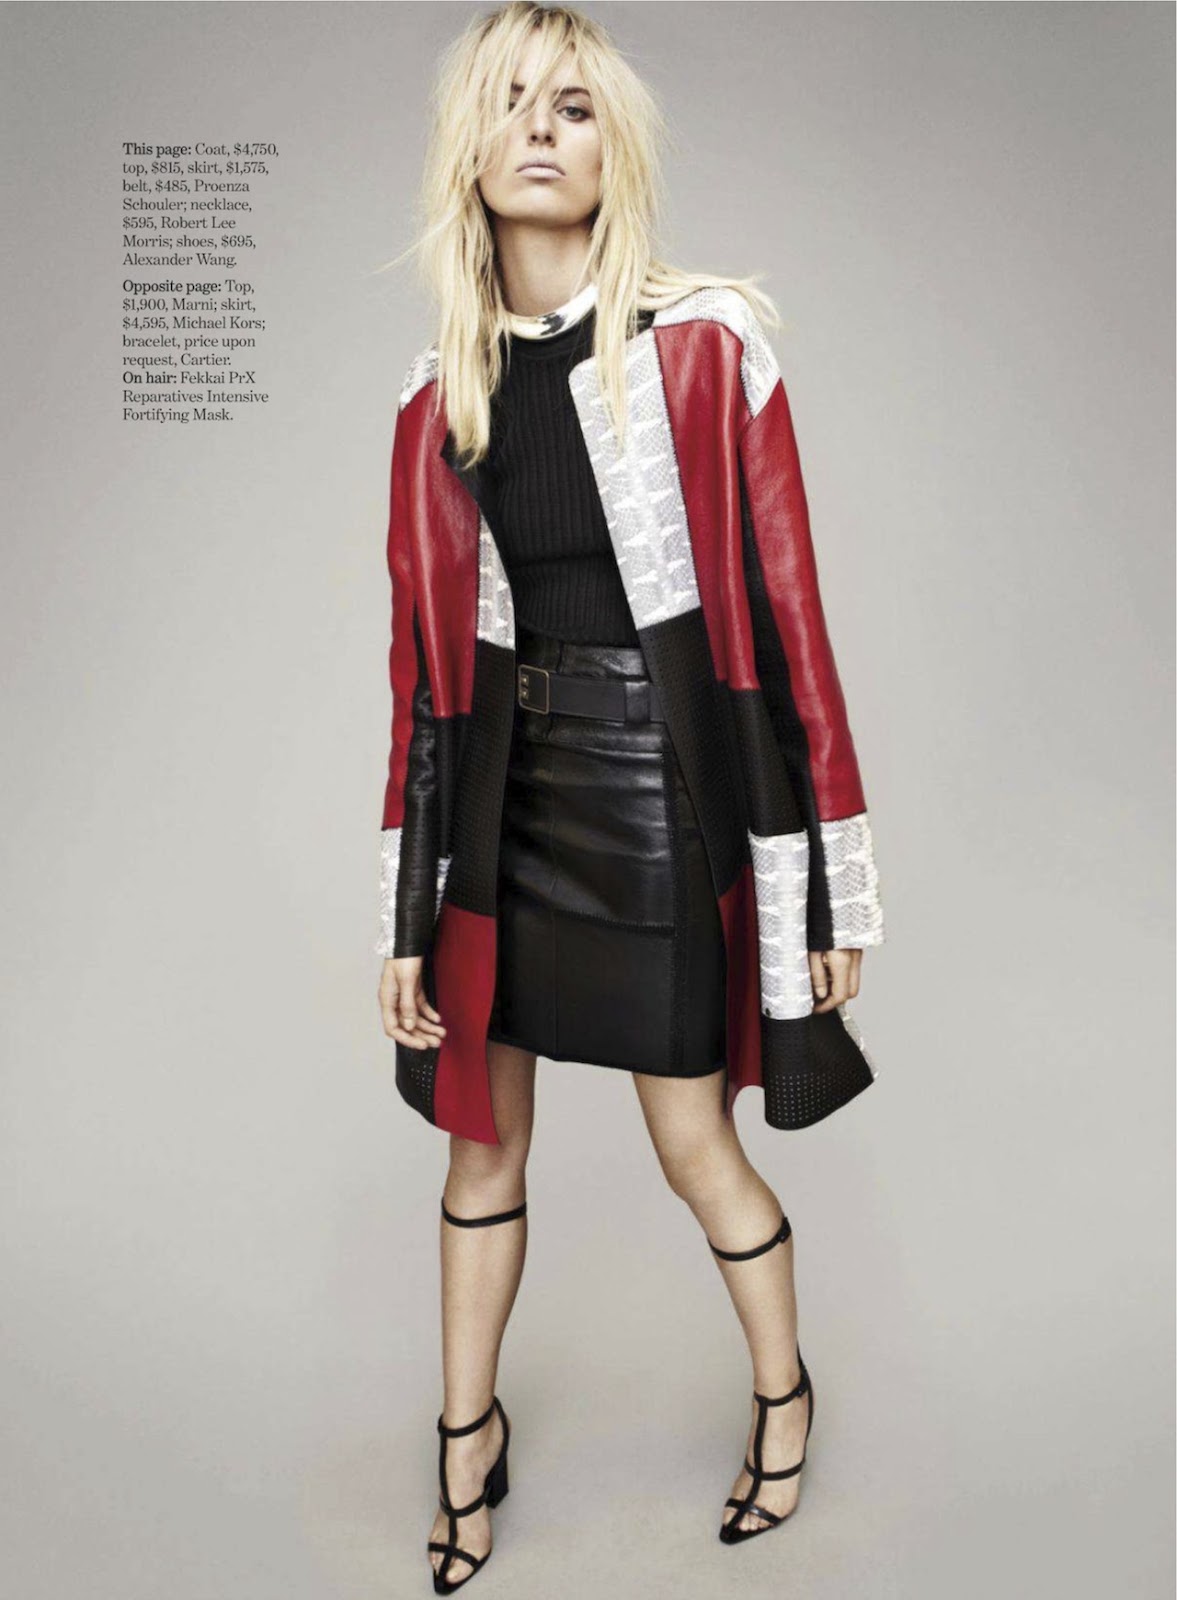 about face: karolina kurkova by alex cayley for us marie claire march ...